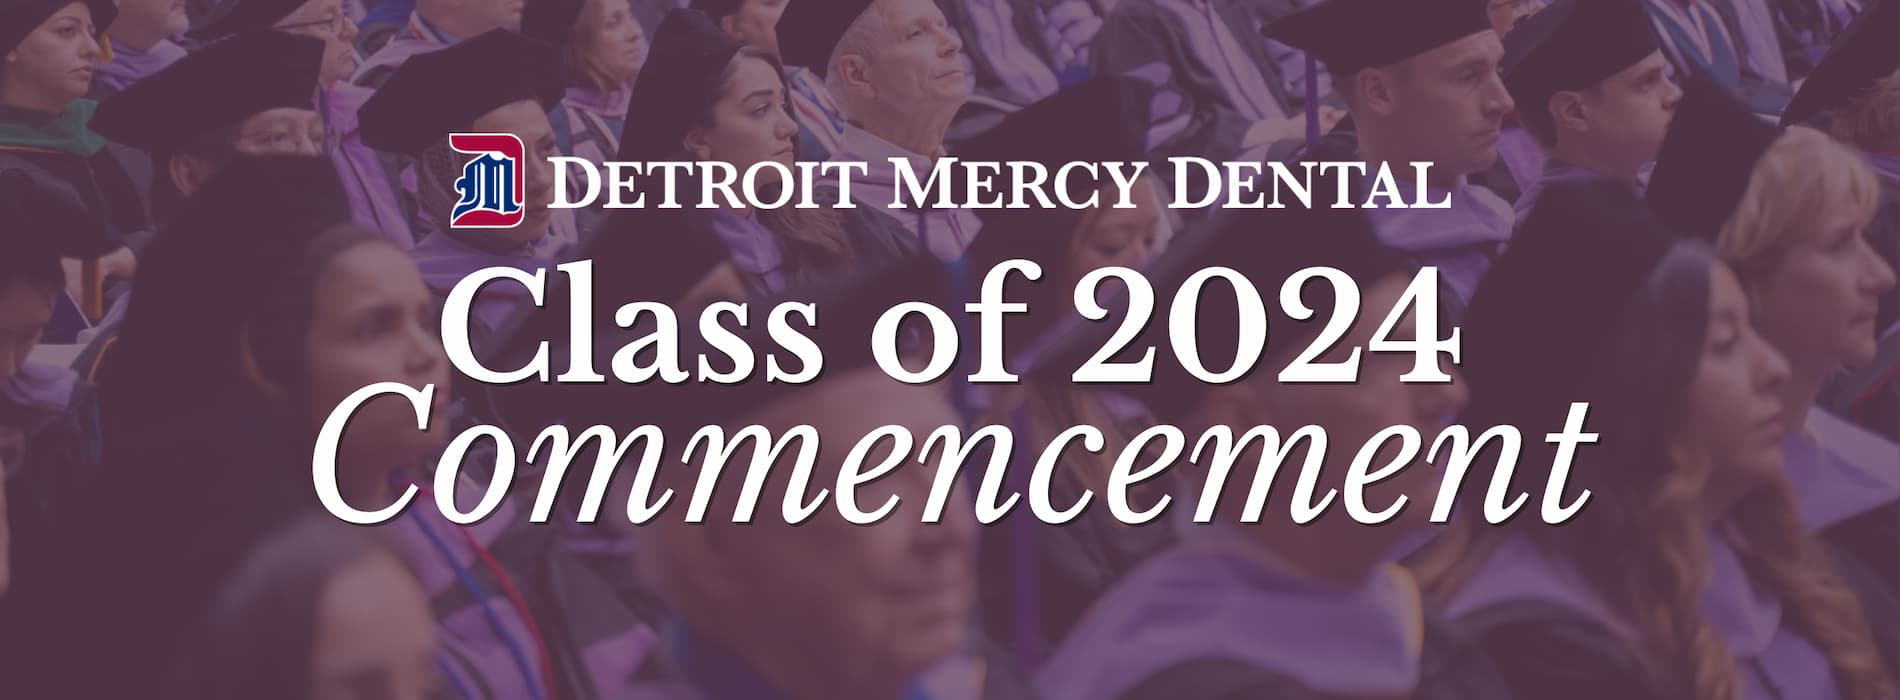 class of 2024 commencement